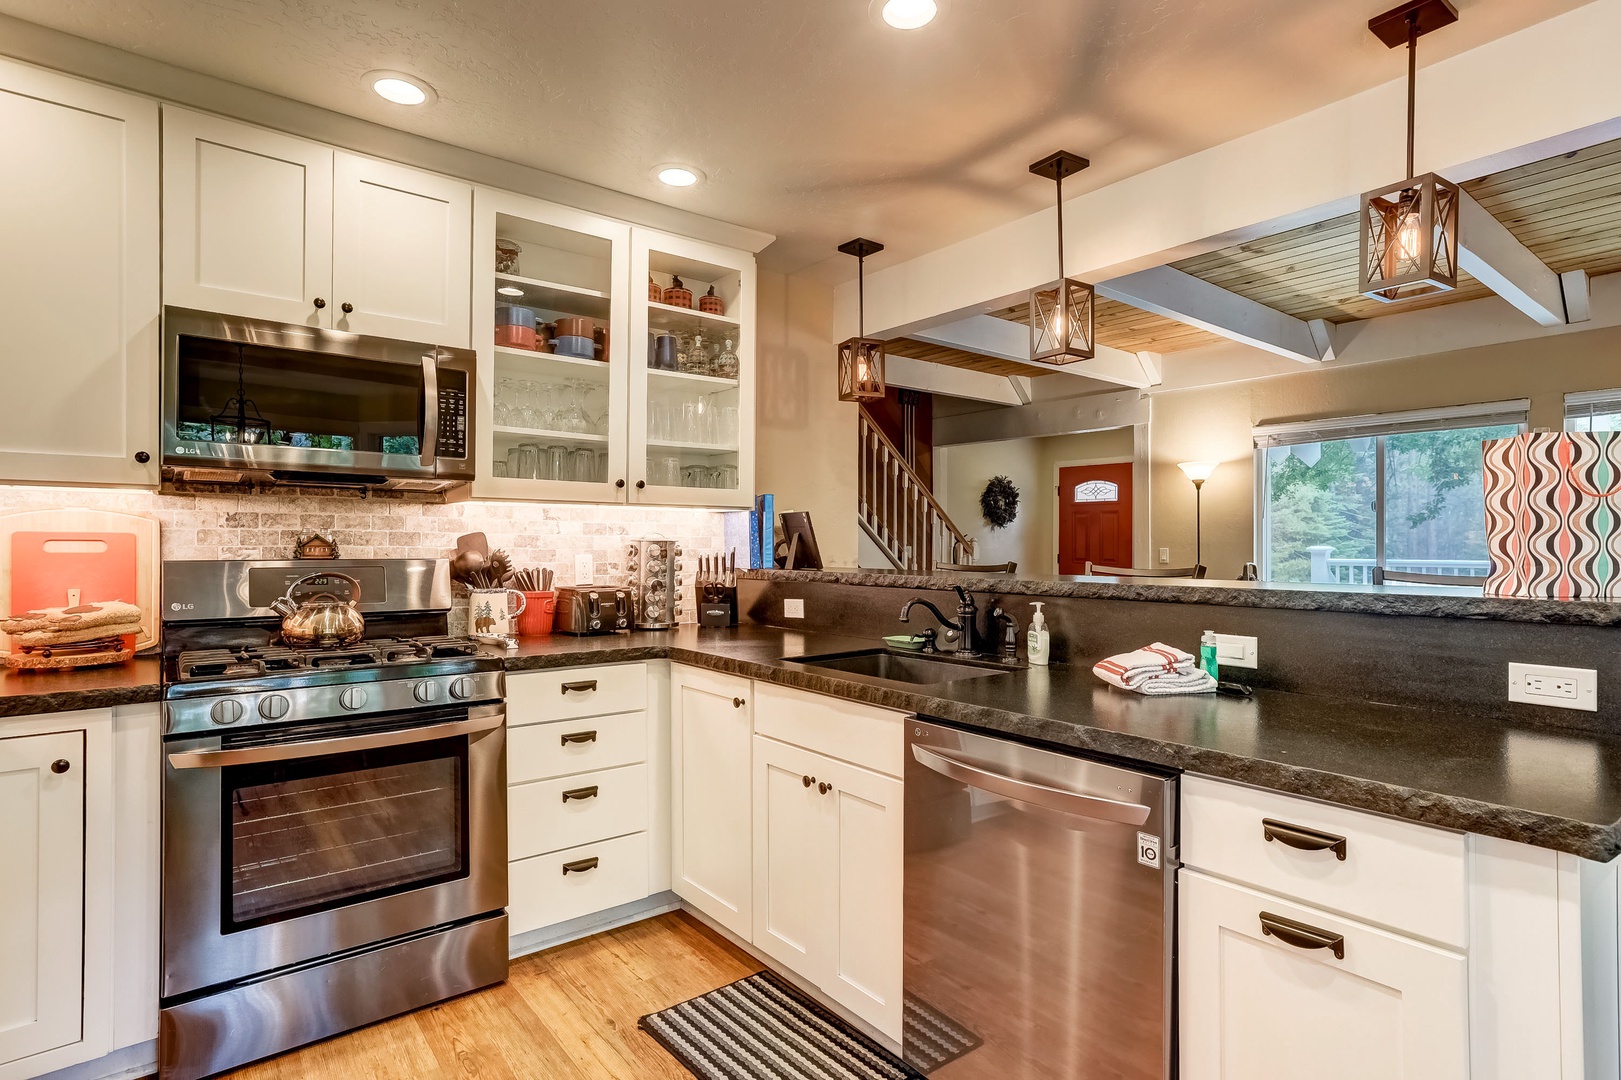 Full kitchen with stainless steel appliances, toaster and more